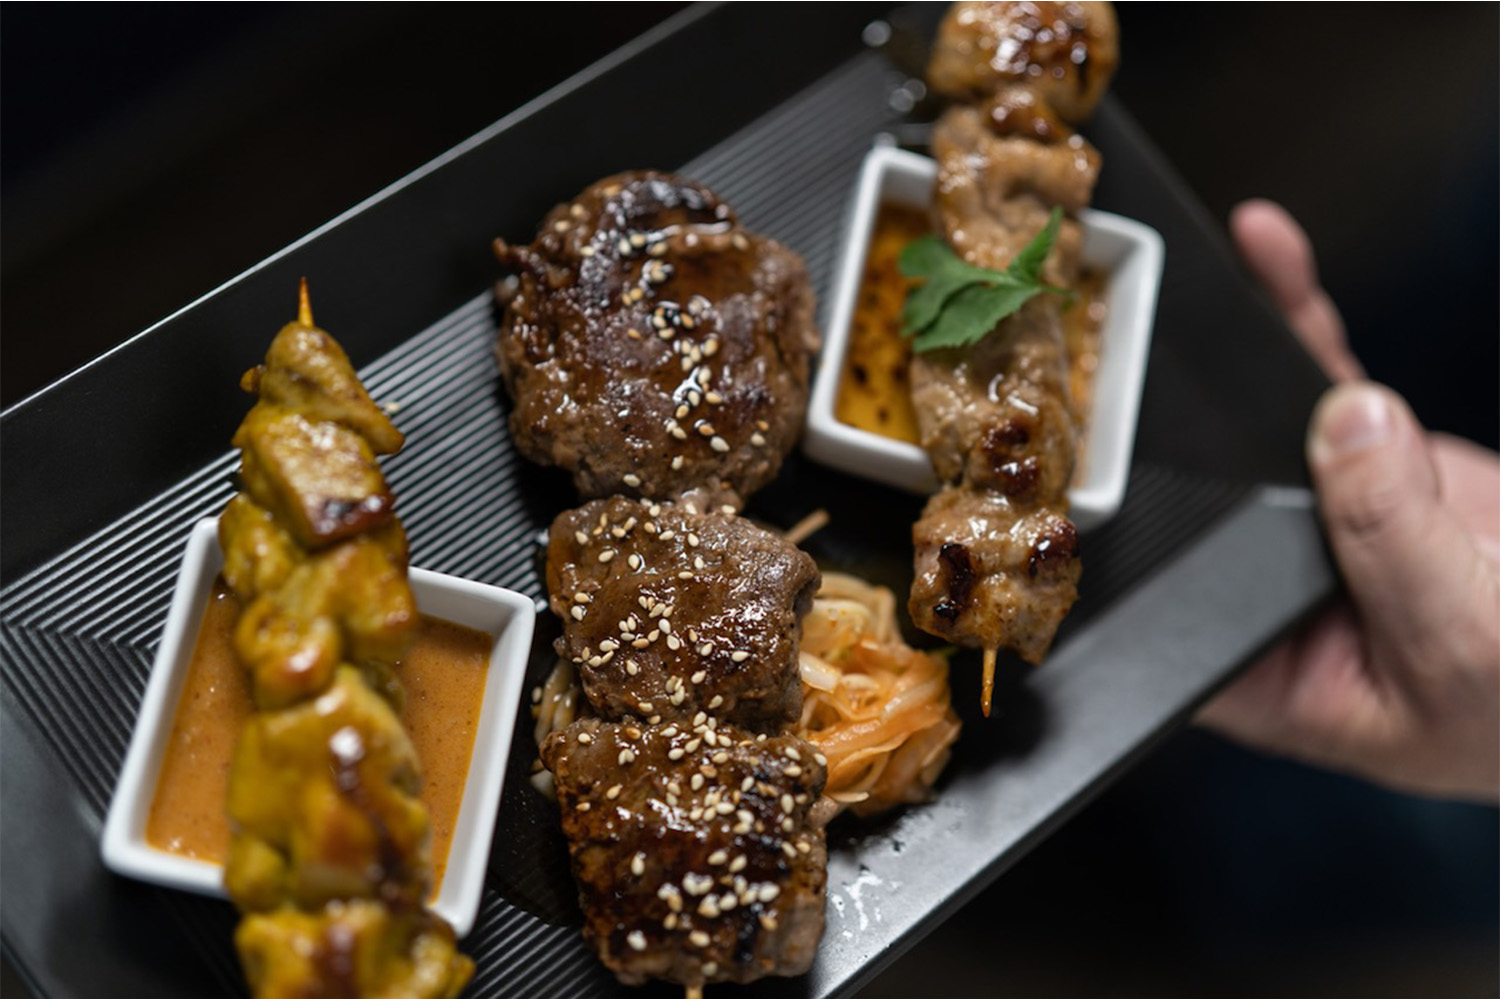 A variety of skewers from Sticx